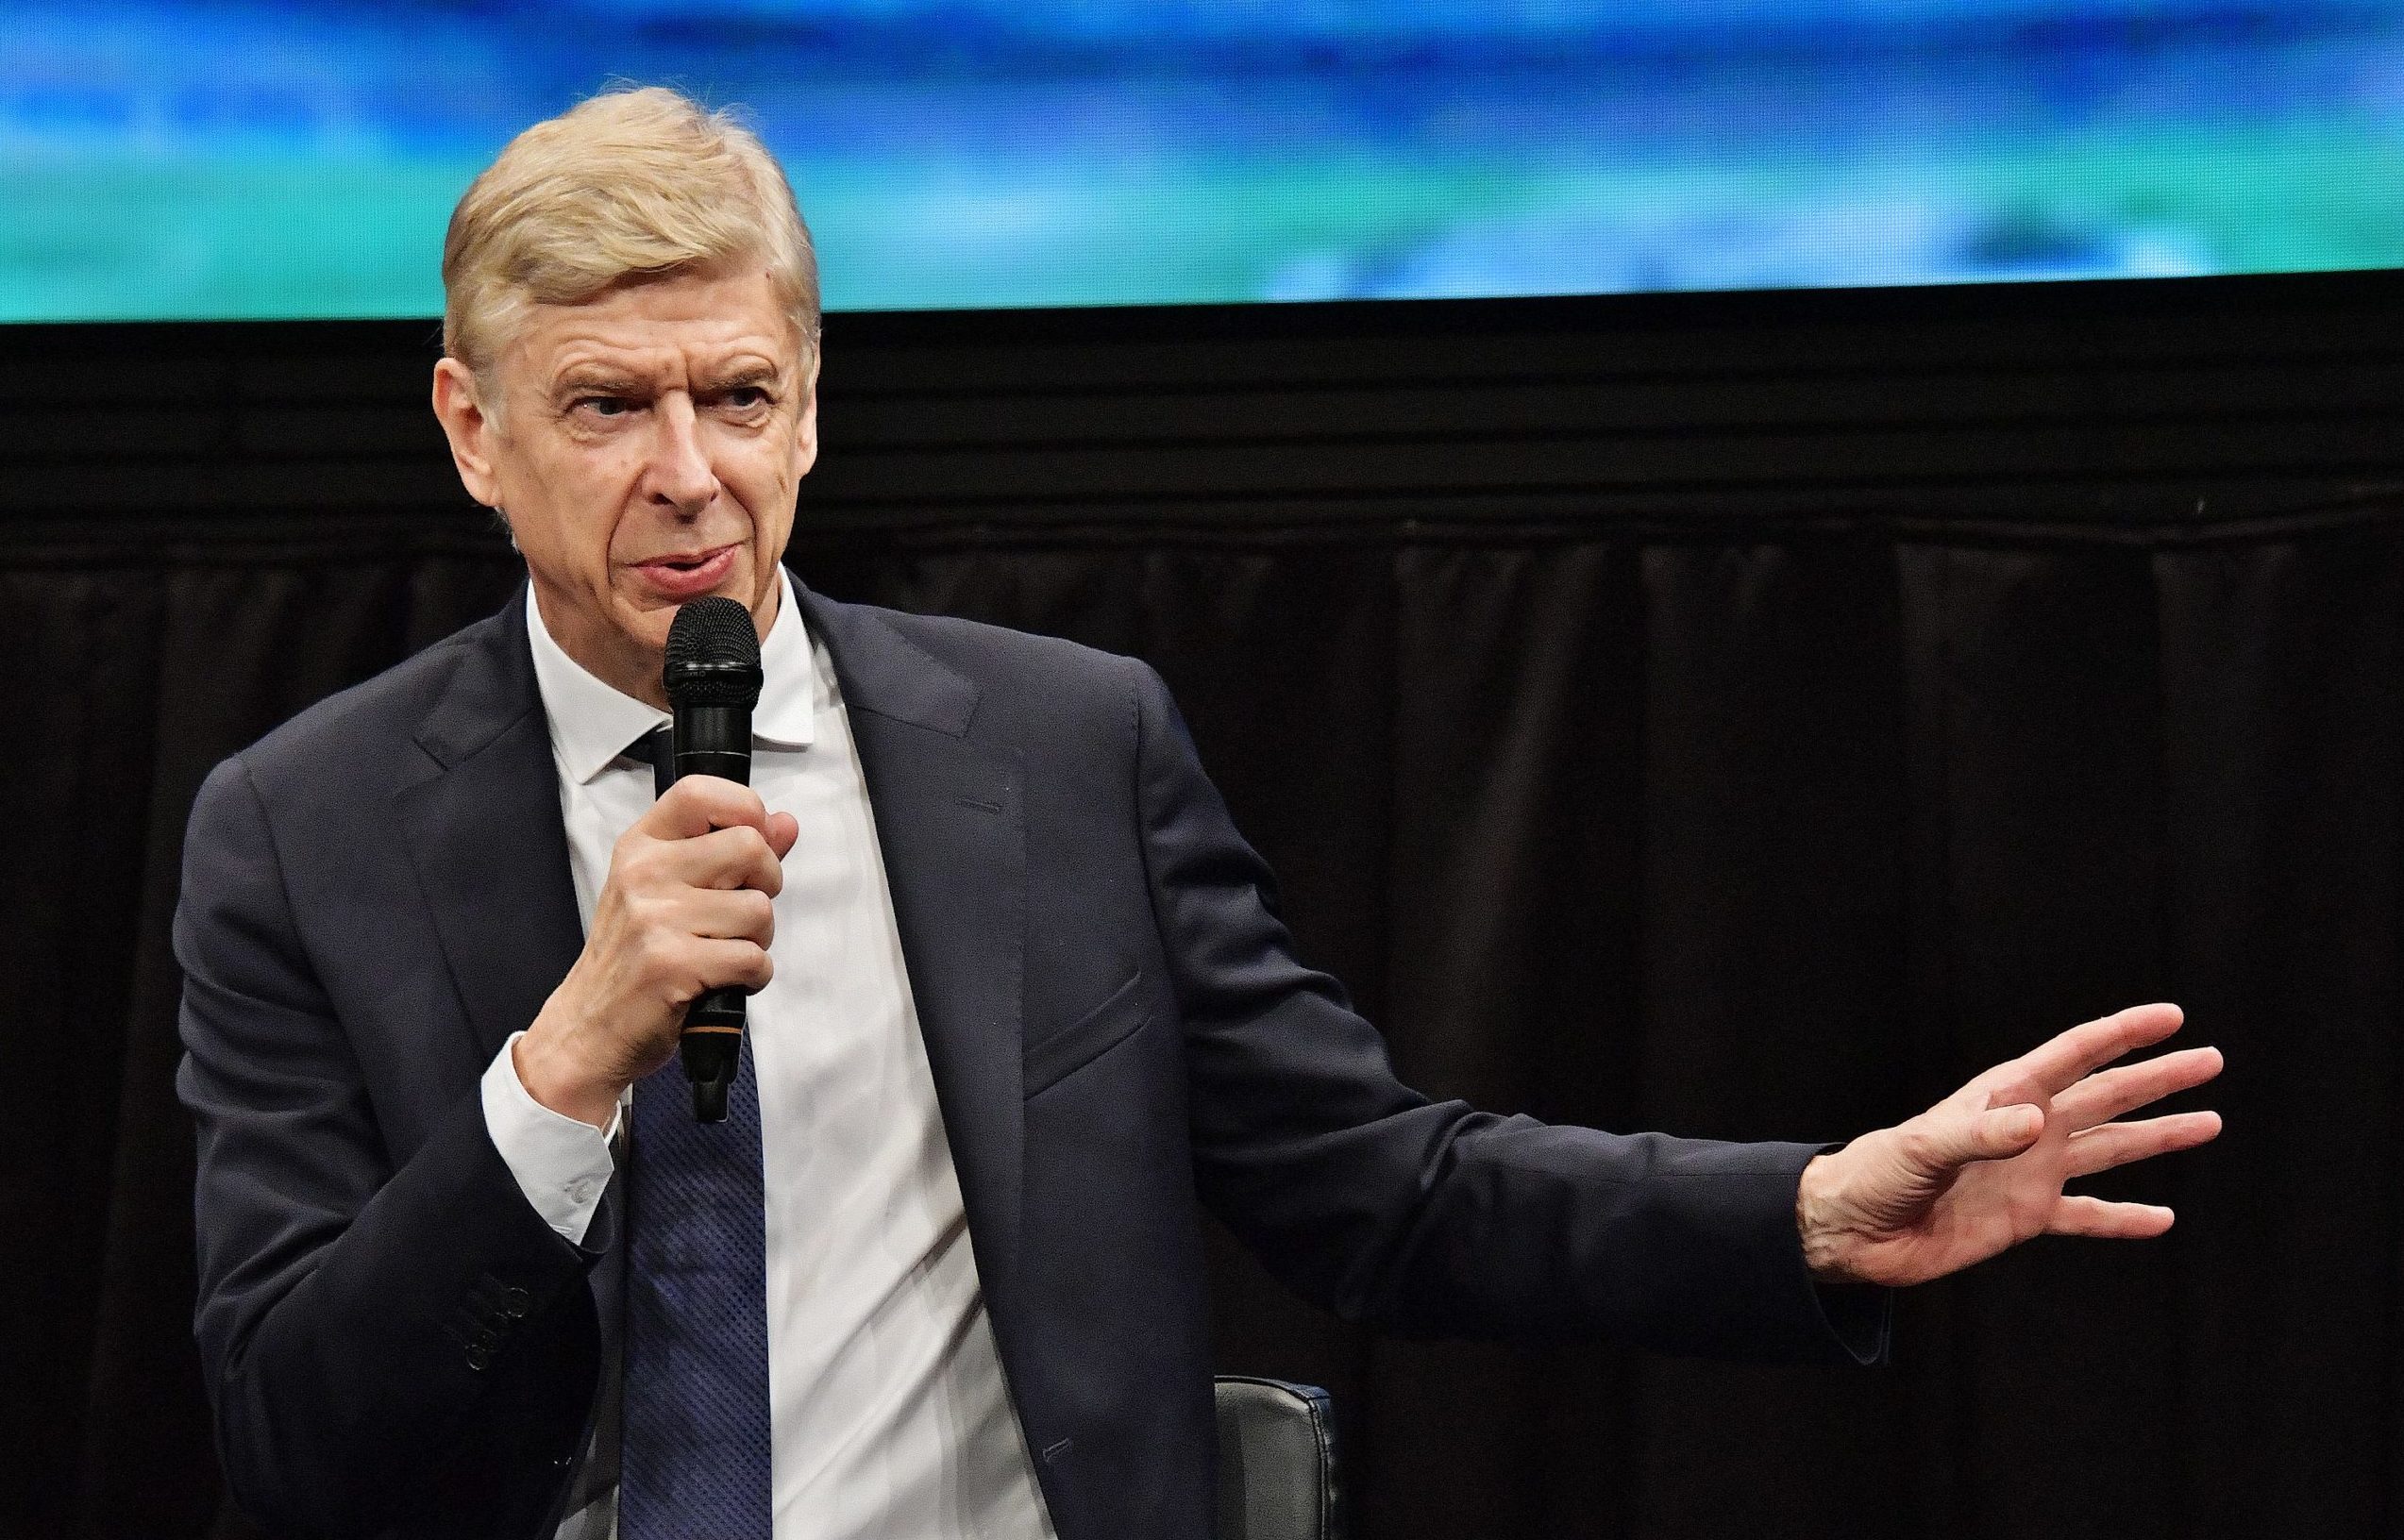 Football’s rule-makers need to listen to people like Arsene Wenger, says Alan